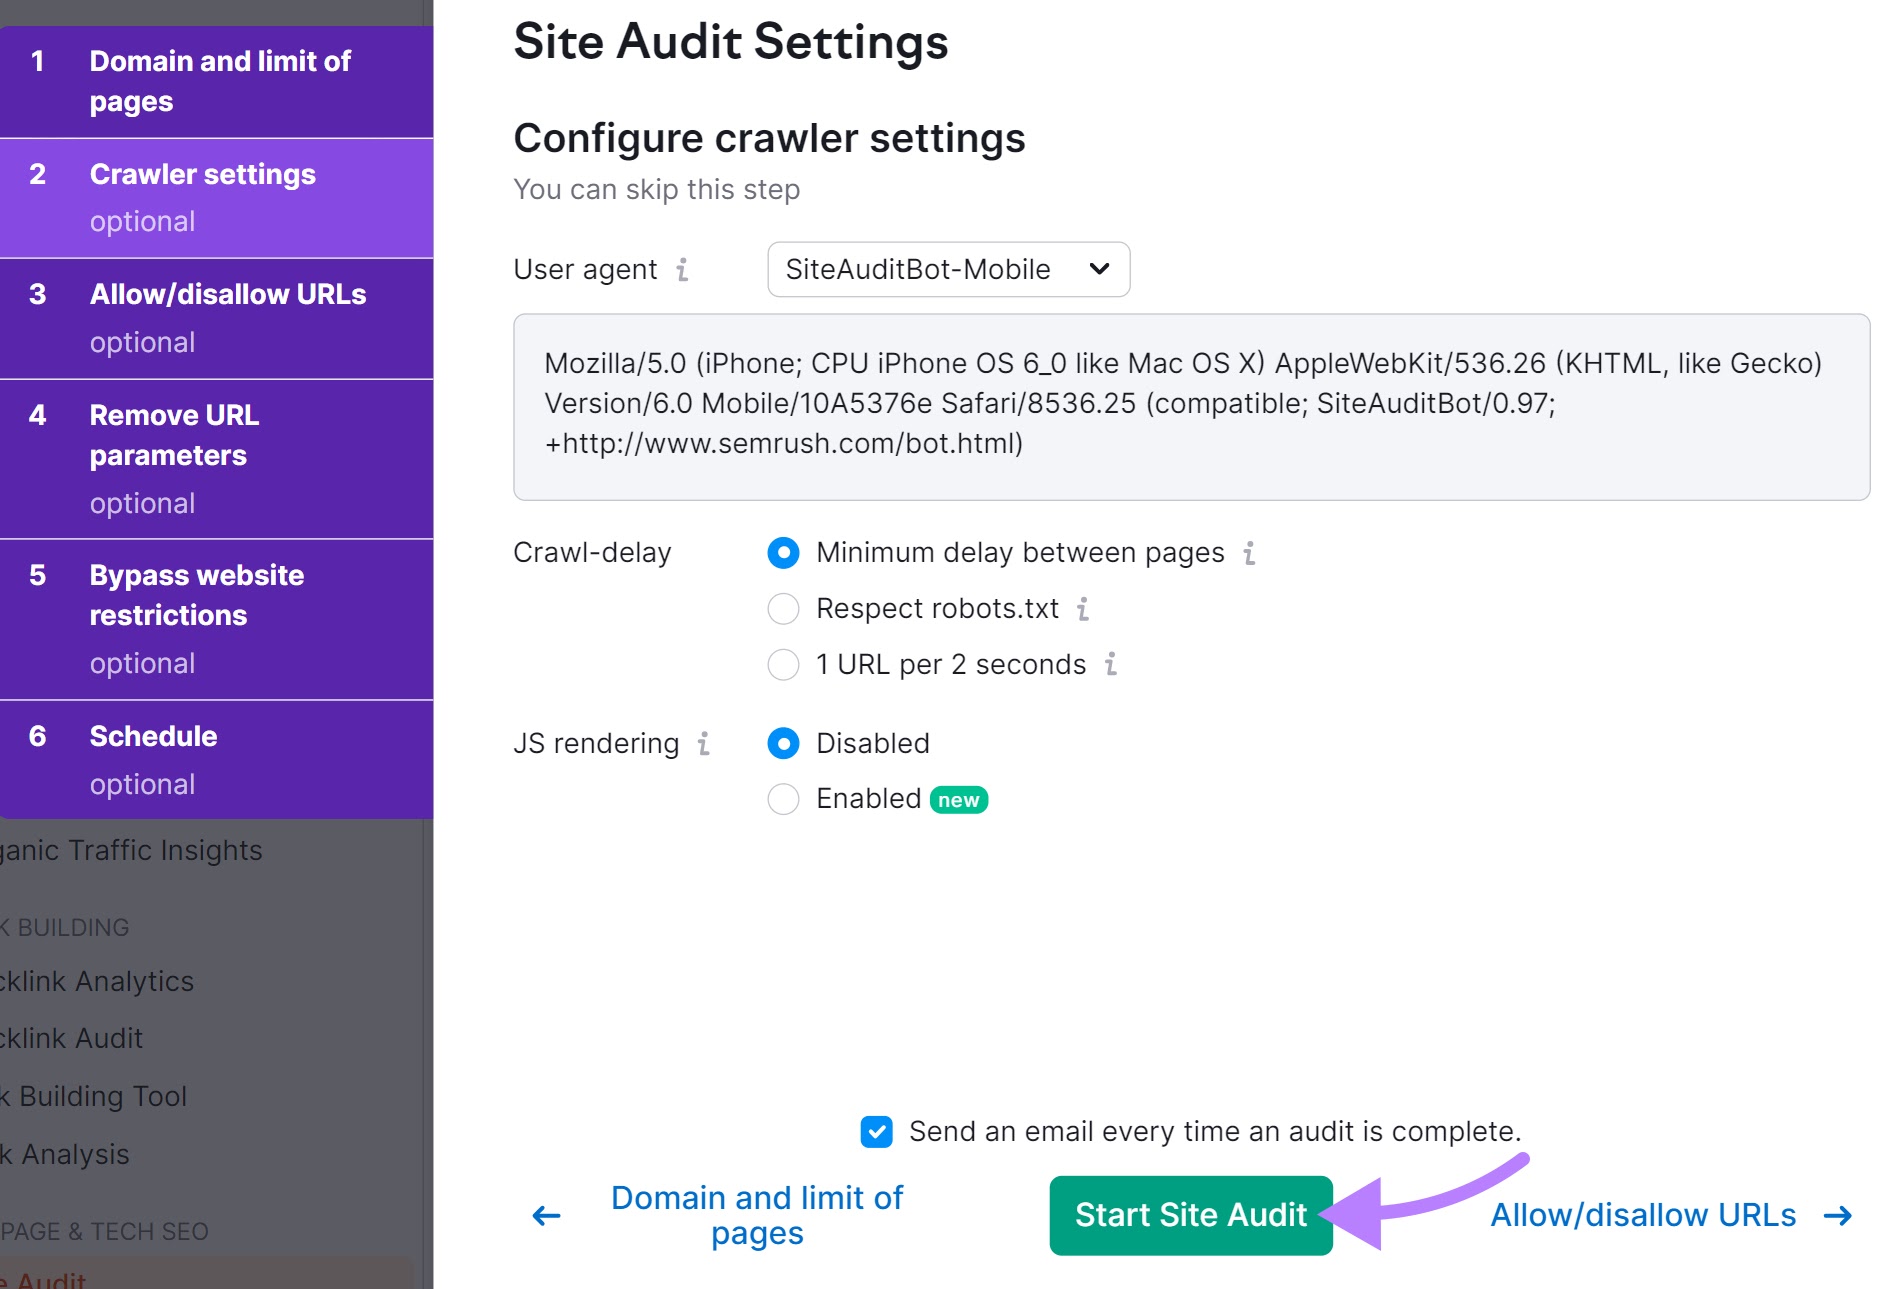 “Start Site Audit" button highlighted in Site Audit Settings